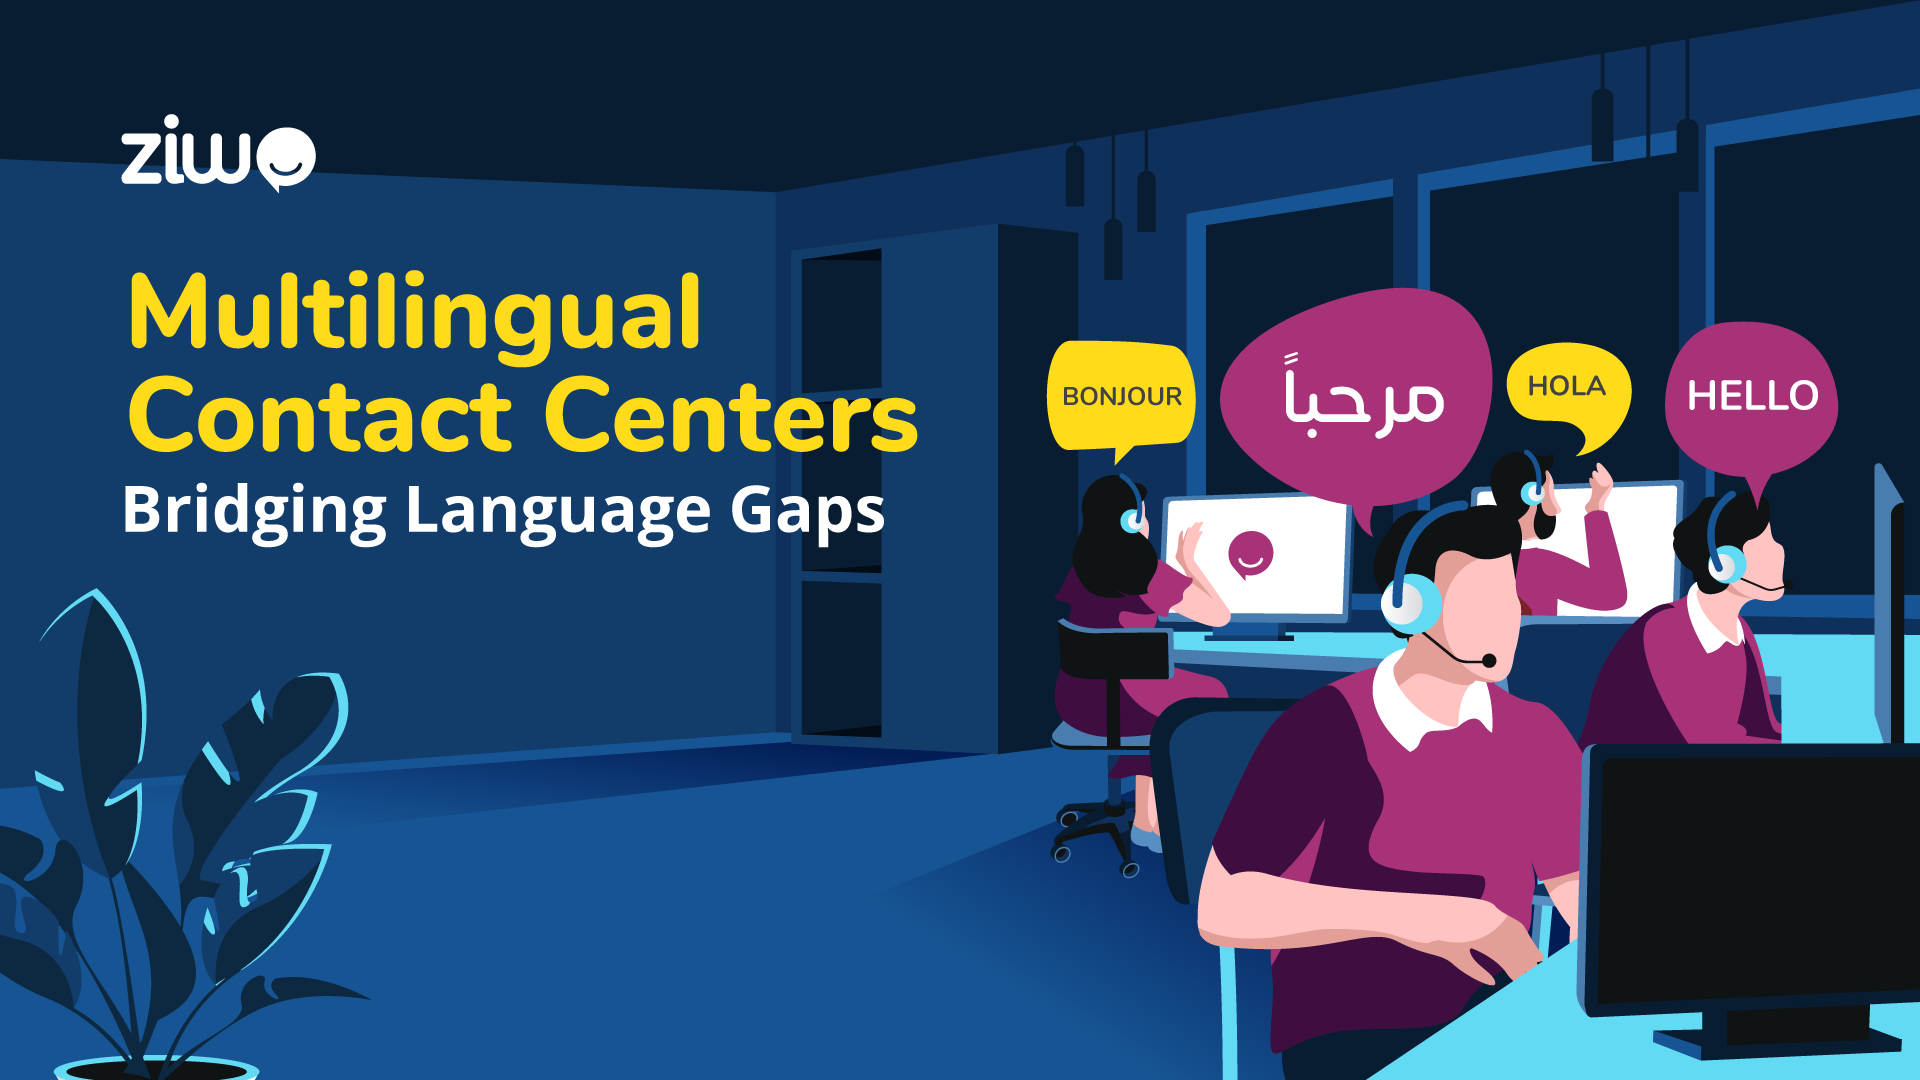 Multilingual contact centers connecting people across language barriers.